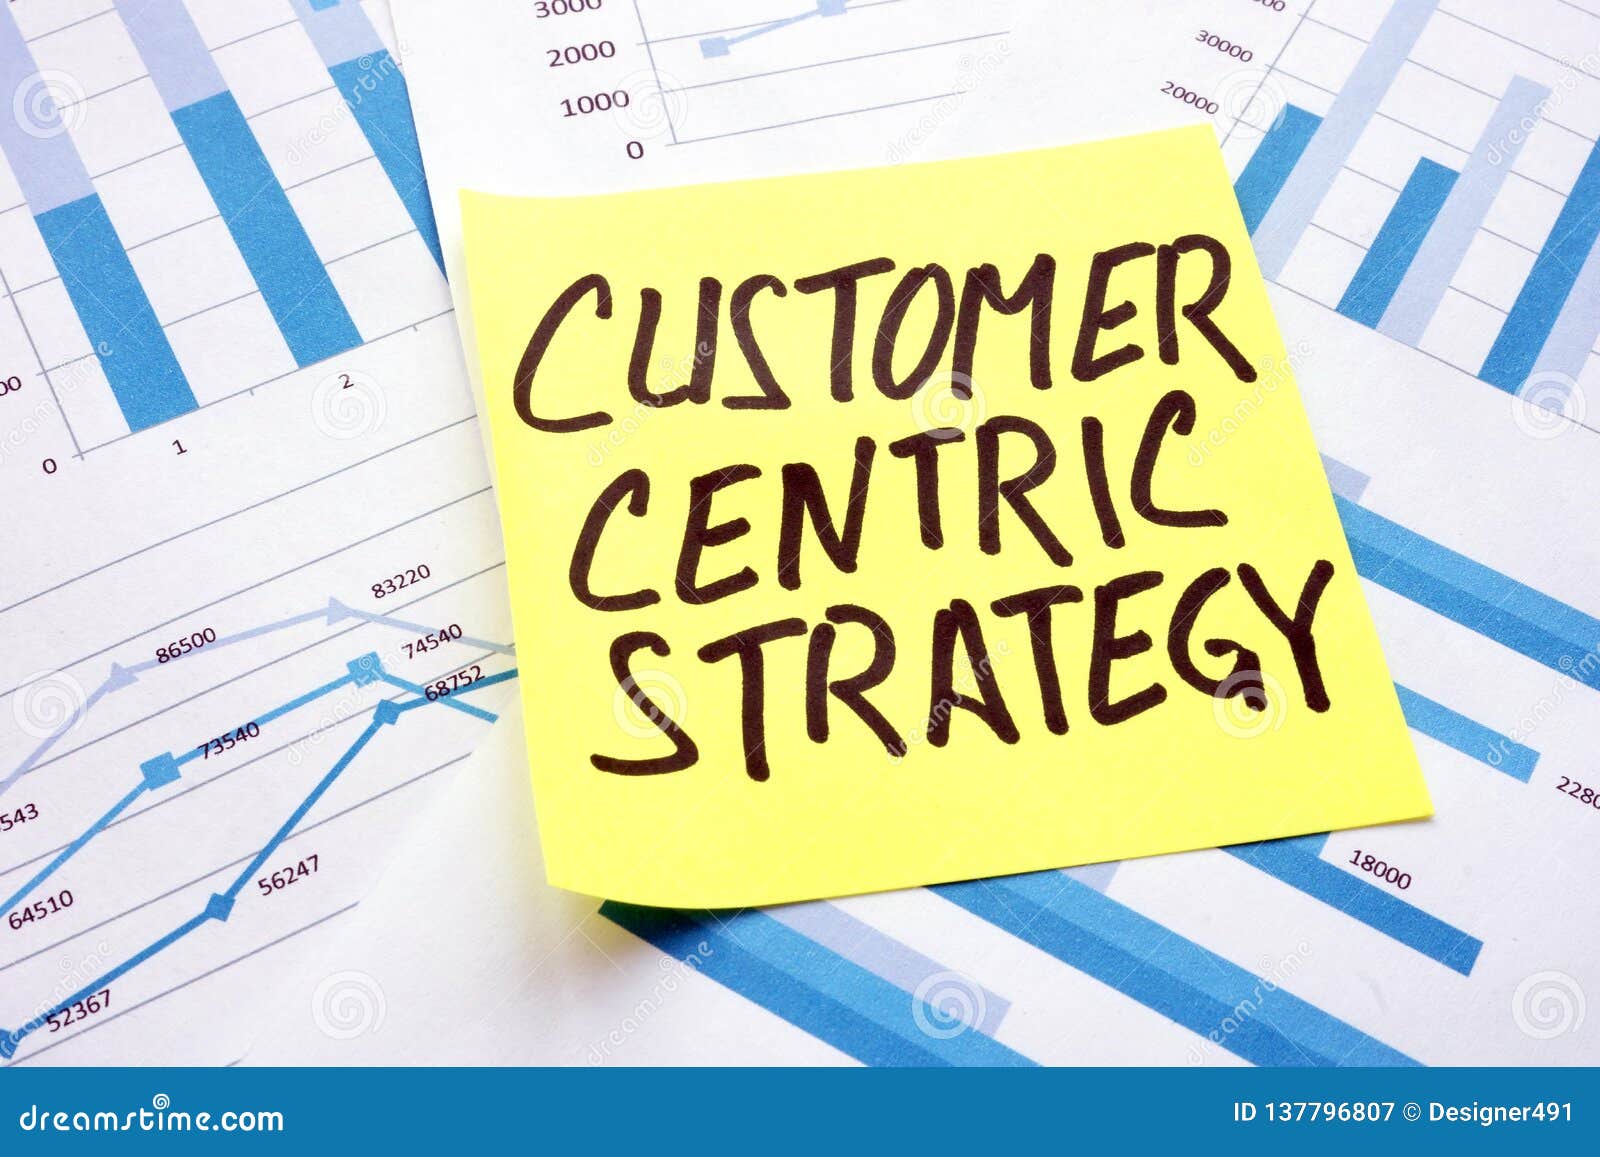 customer centric strategy and pile of the files